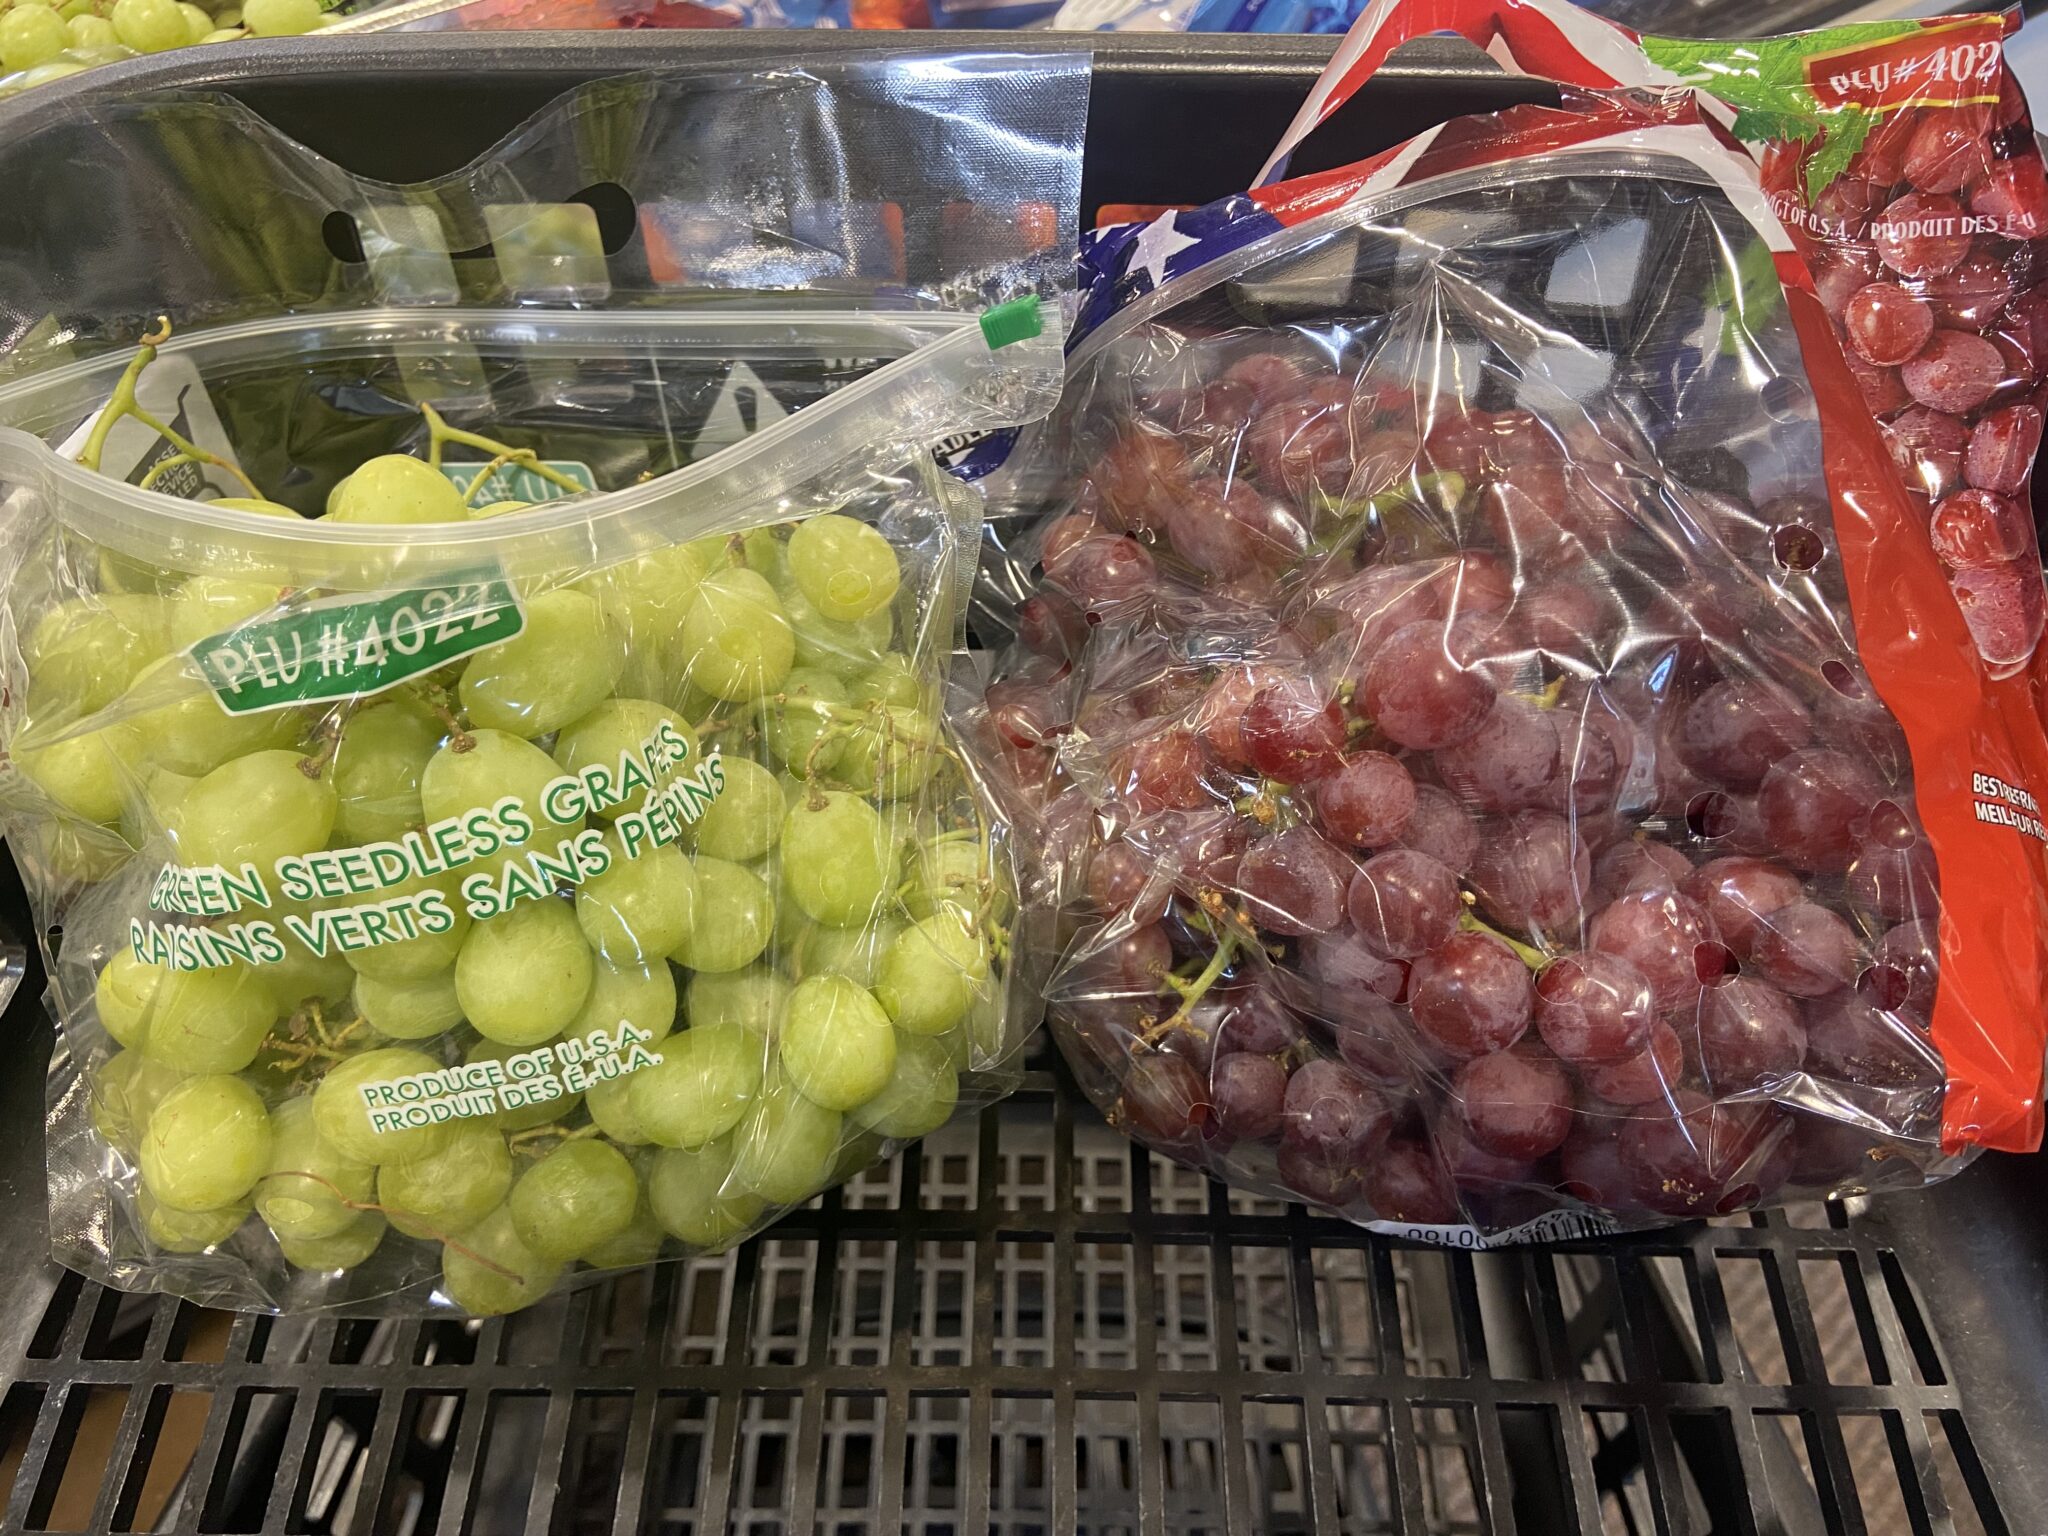 Giant: Green Or Red Seedless Grapes ONLY $0.97 Lb Thru 9/21